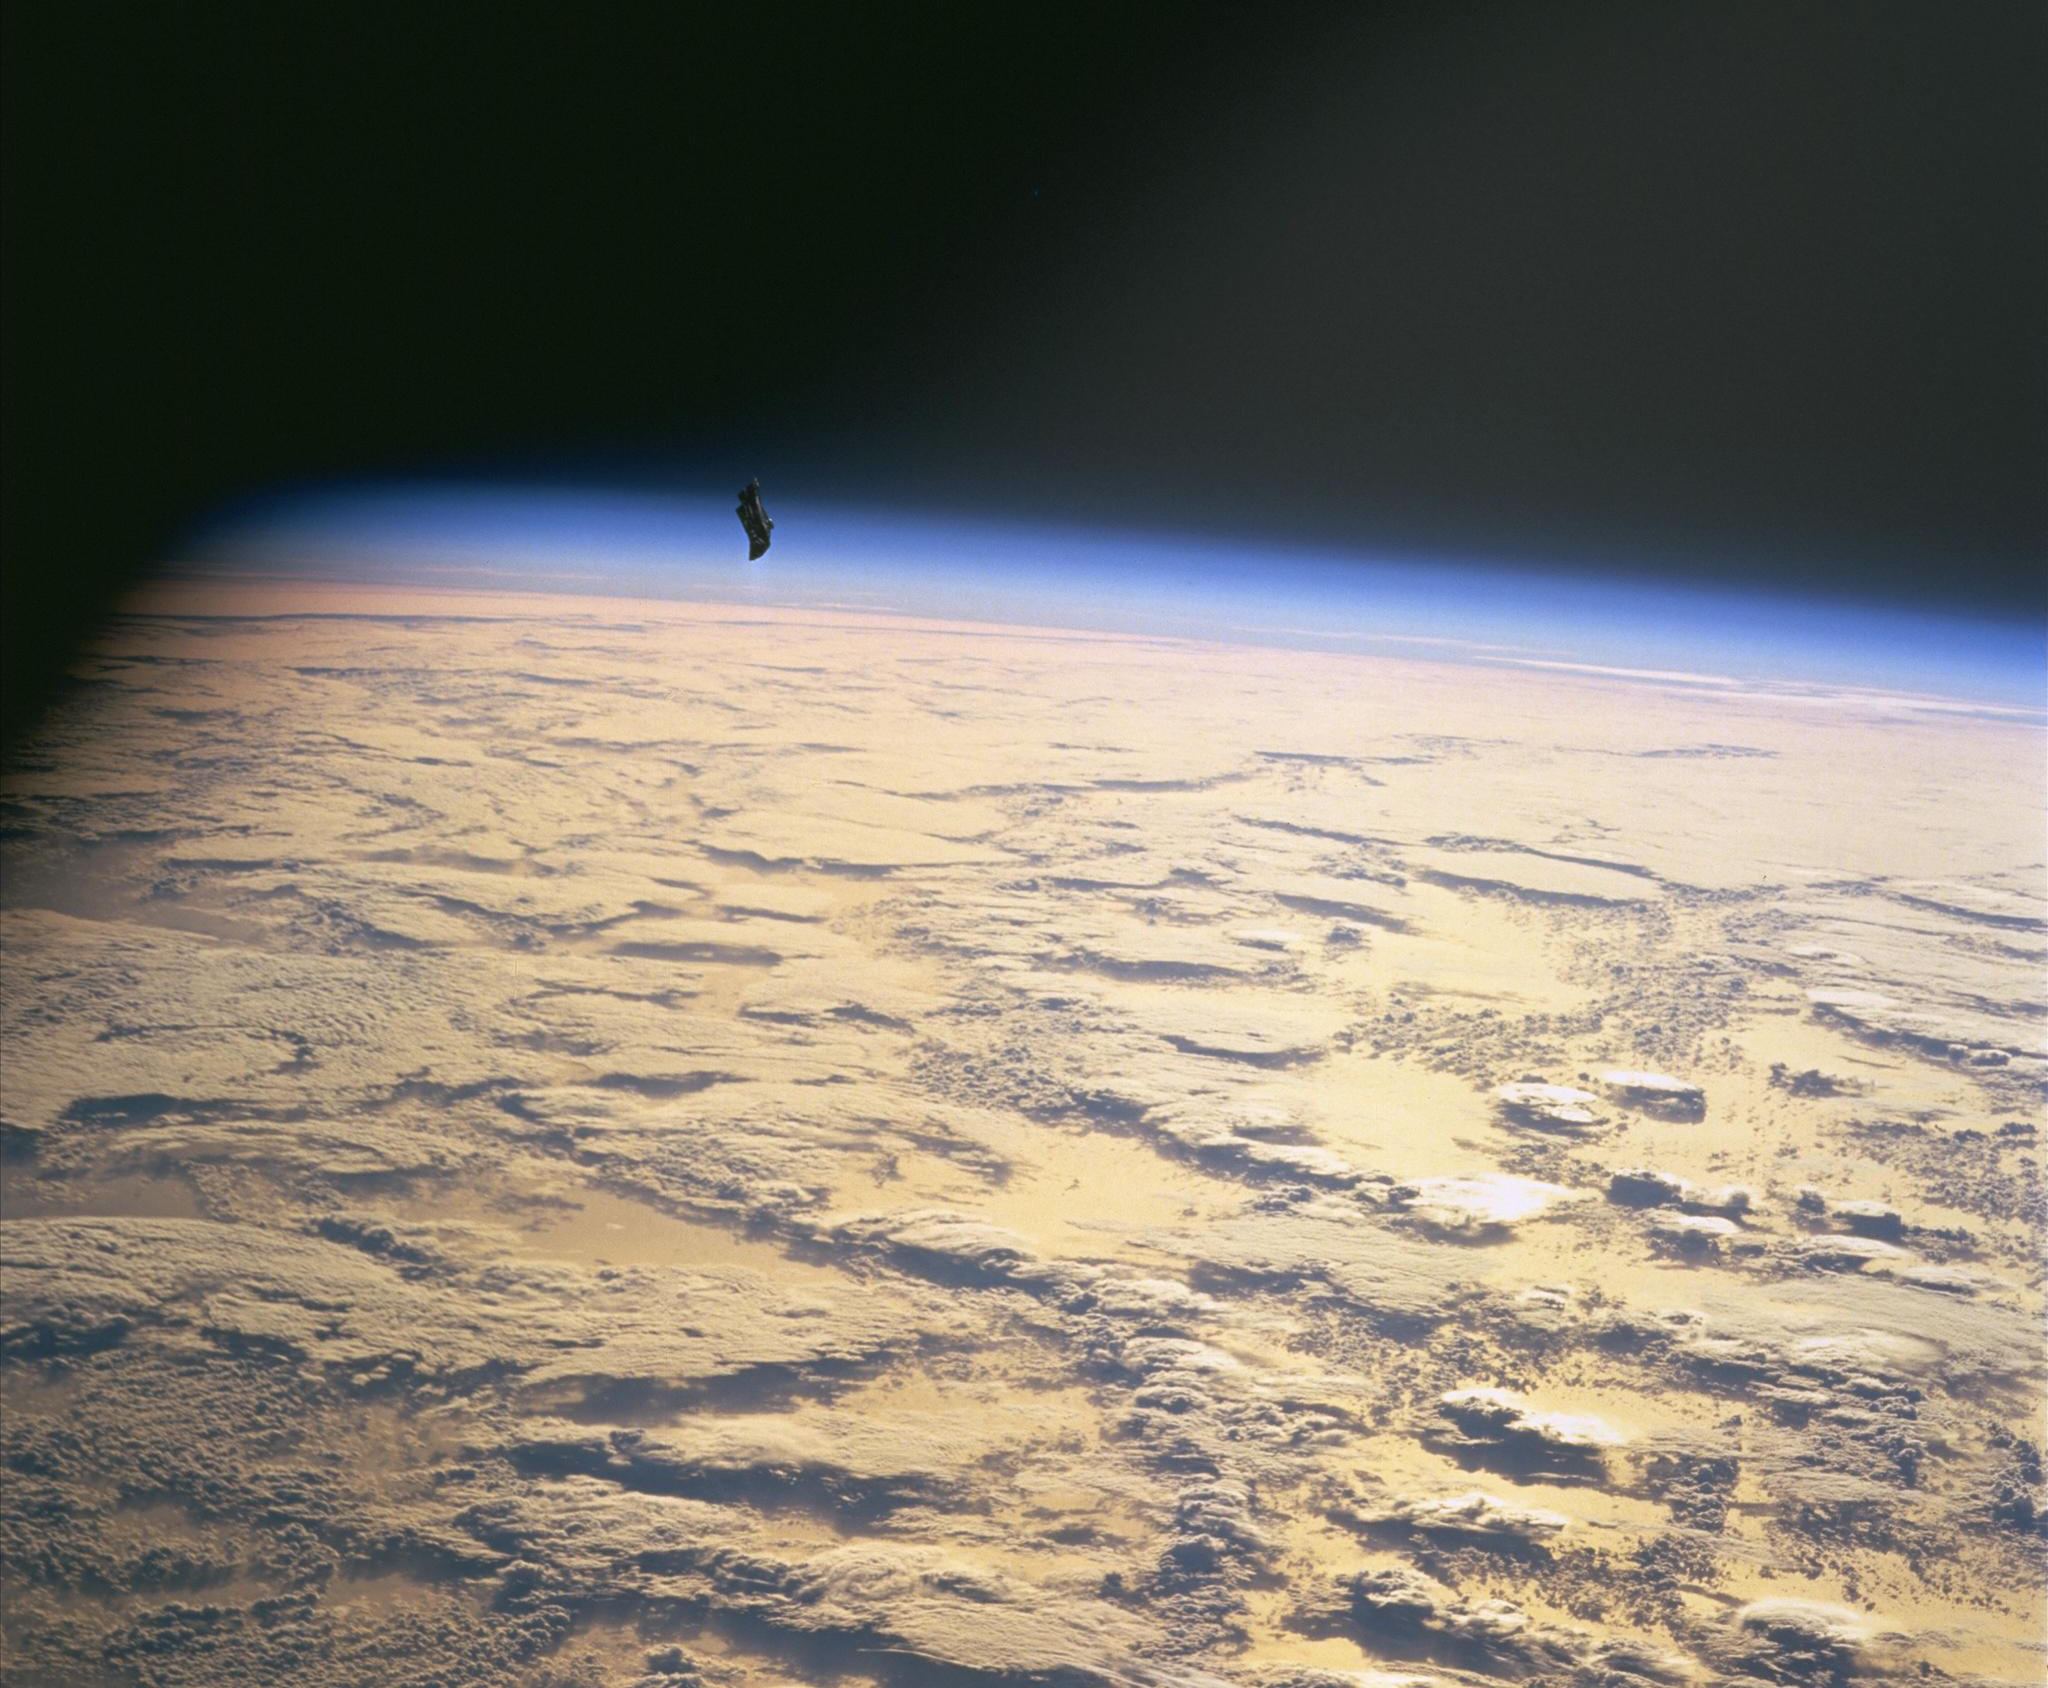 The Black Knight Satellite — Intuitive Insight into the Mystery